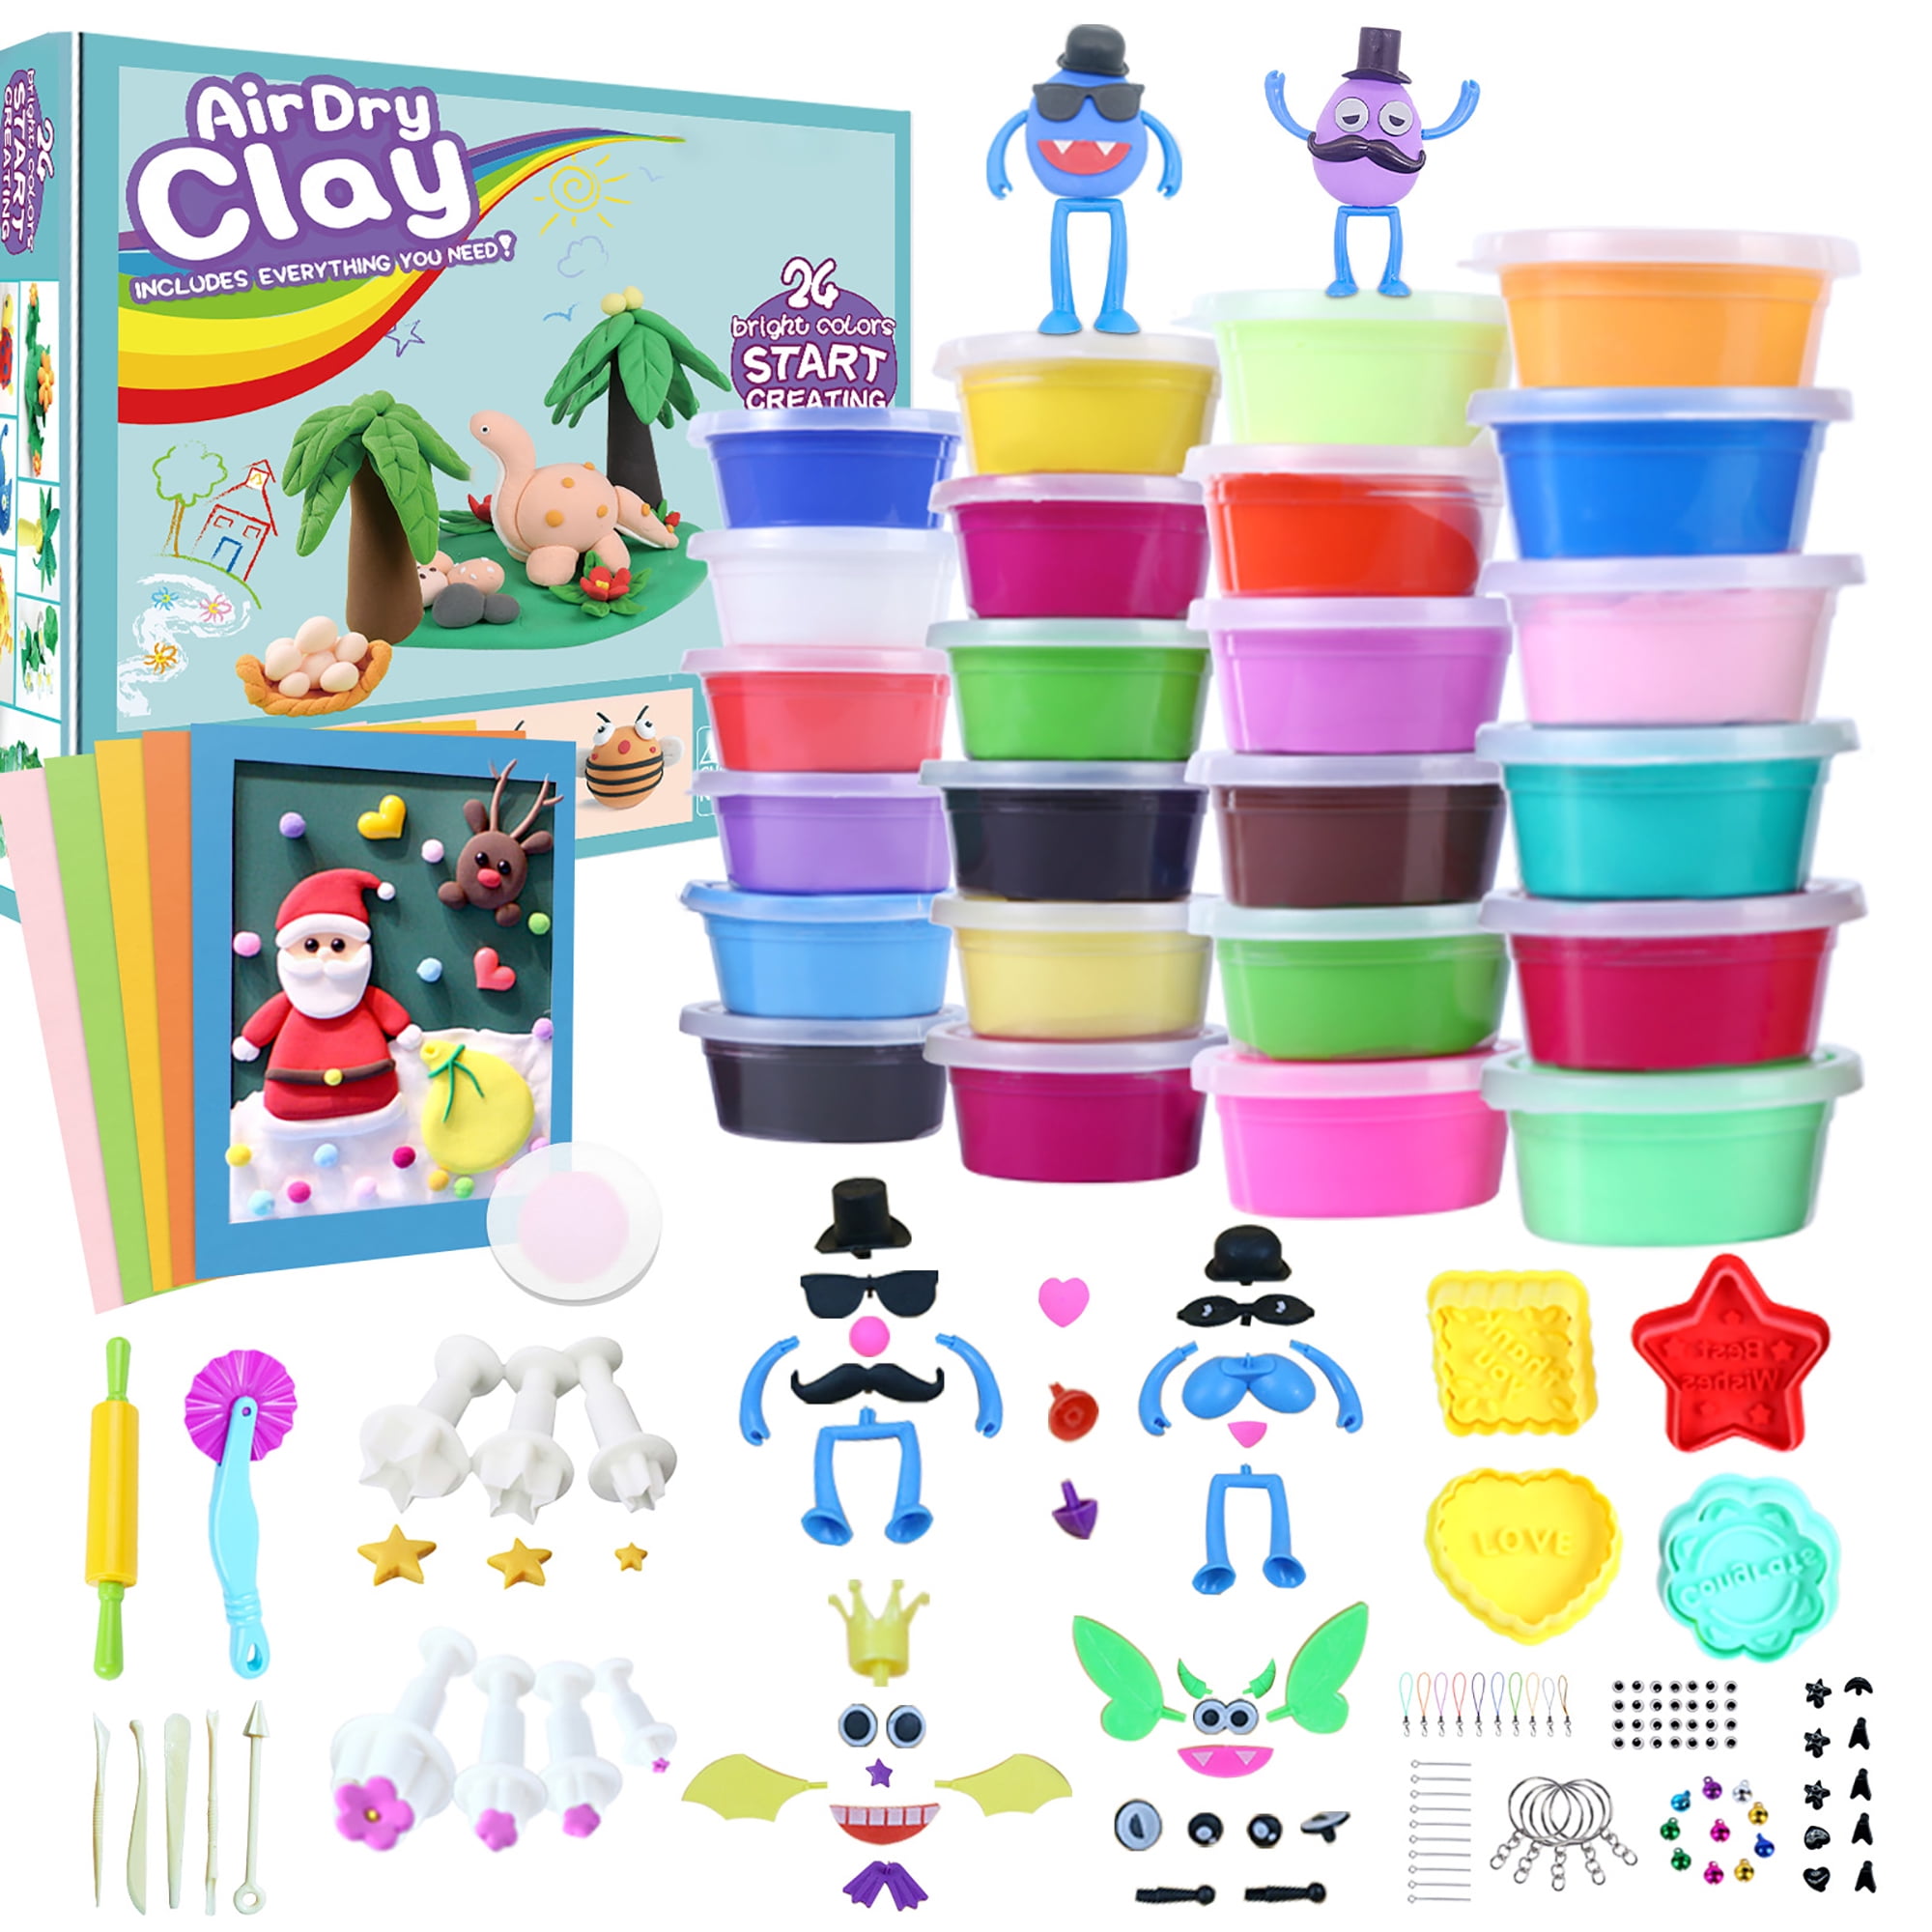  Arteza Kids Air-Dry Modeling Clay Kit, 6 x 8-oz Packs, 12 Sandy  Clay Molds and 15 Assorted Sea-Life Beach Decorations, Soft, Pliable,  Supplies for Kids' Crafts and Sensory Play